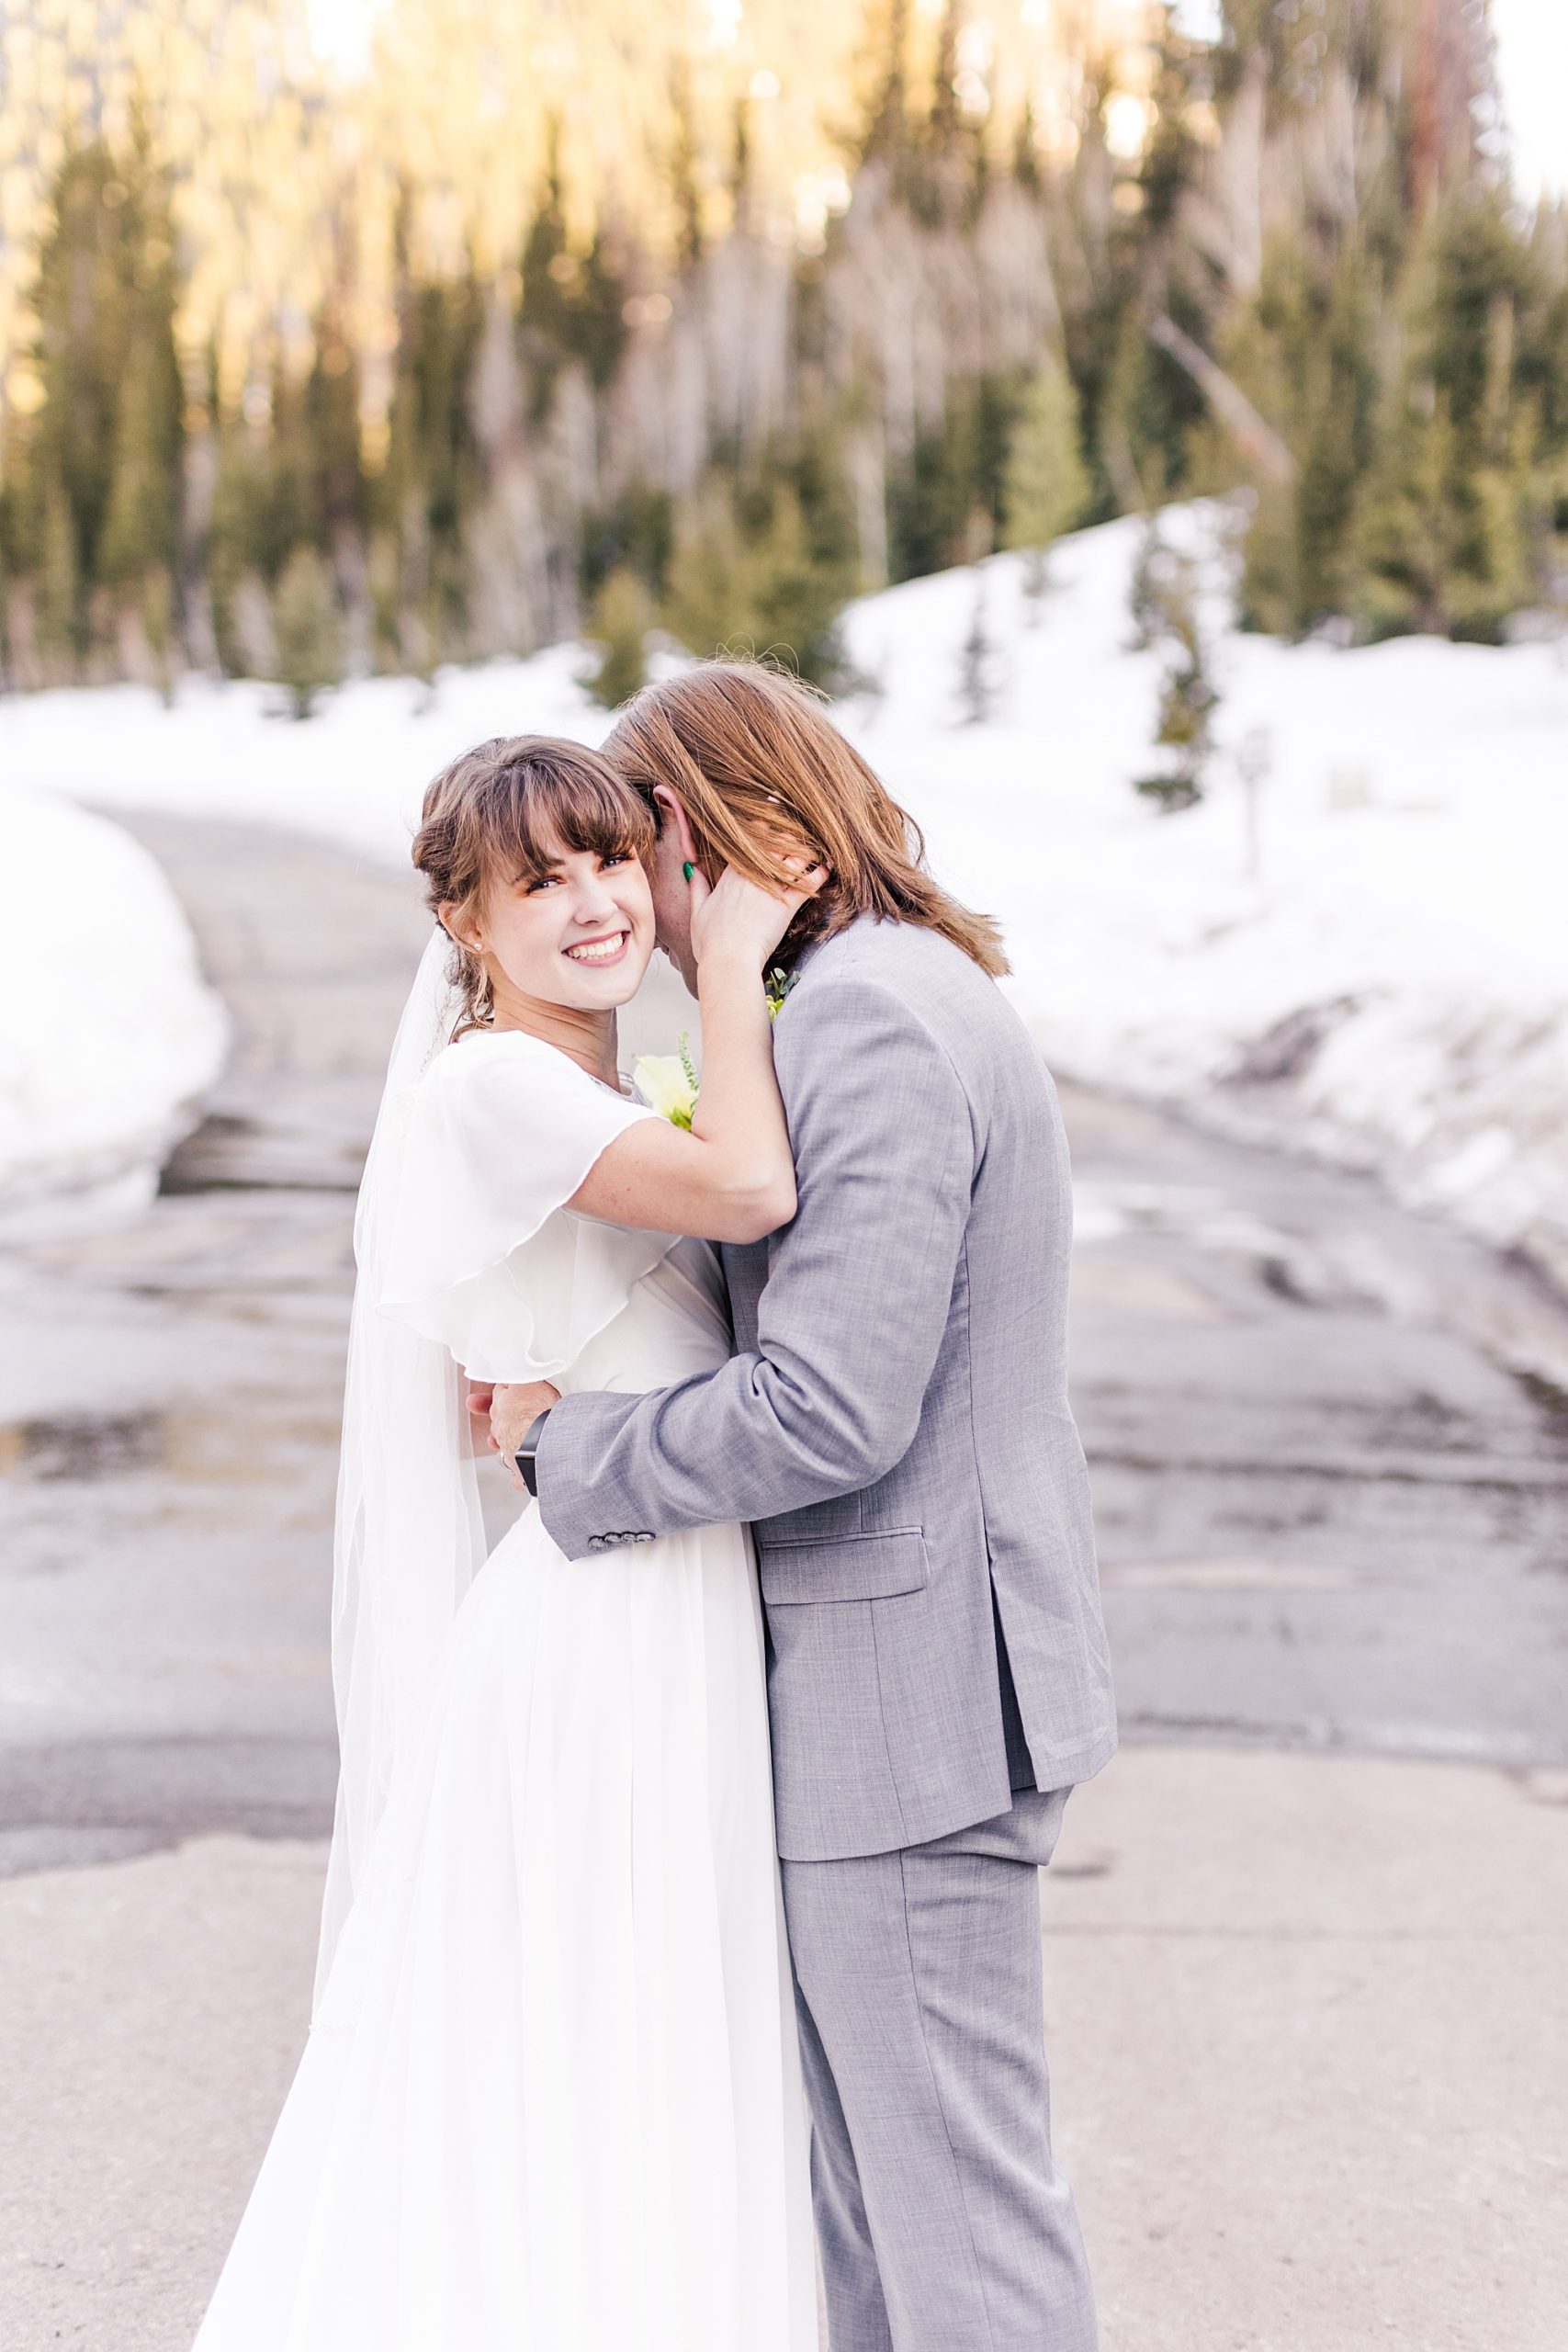 Wedding formals in the Utah mountains